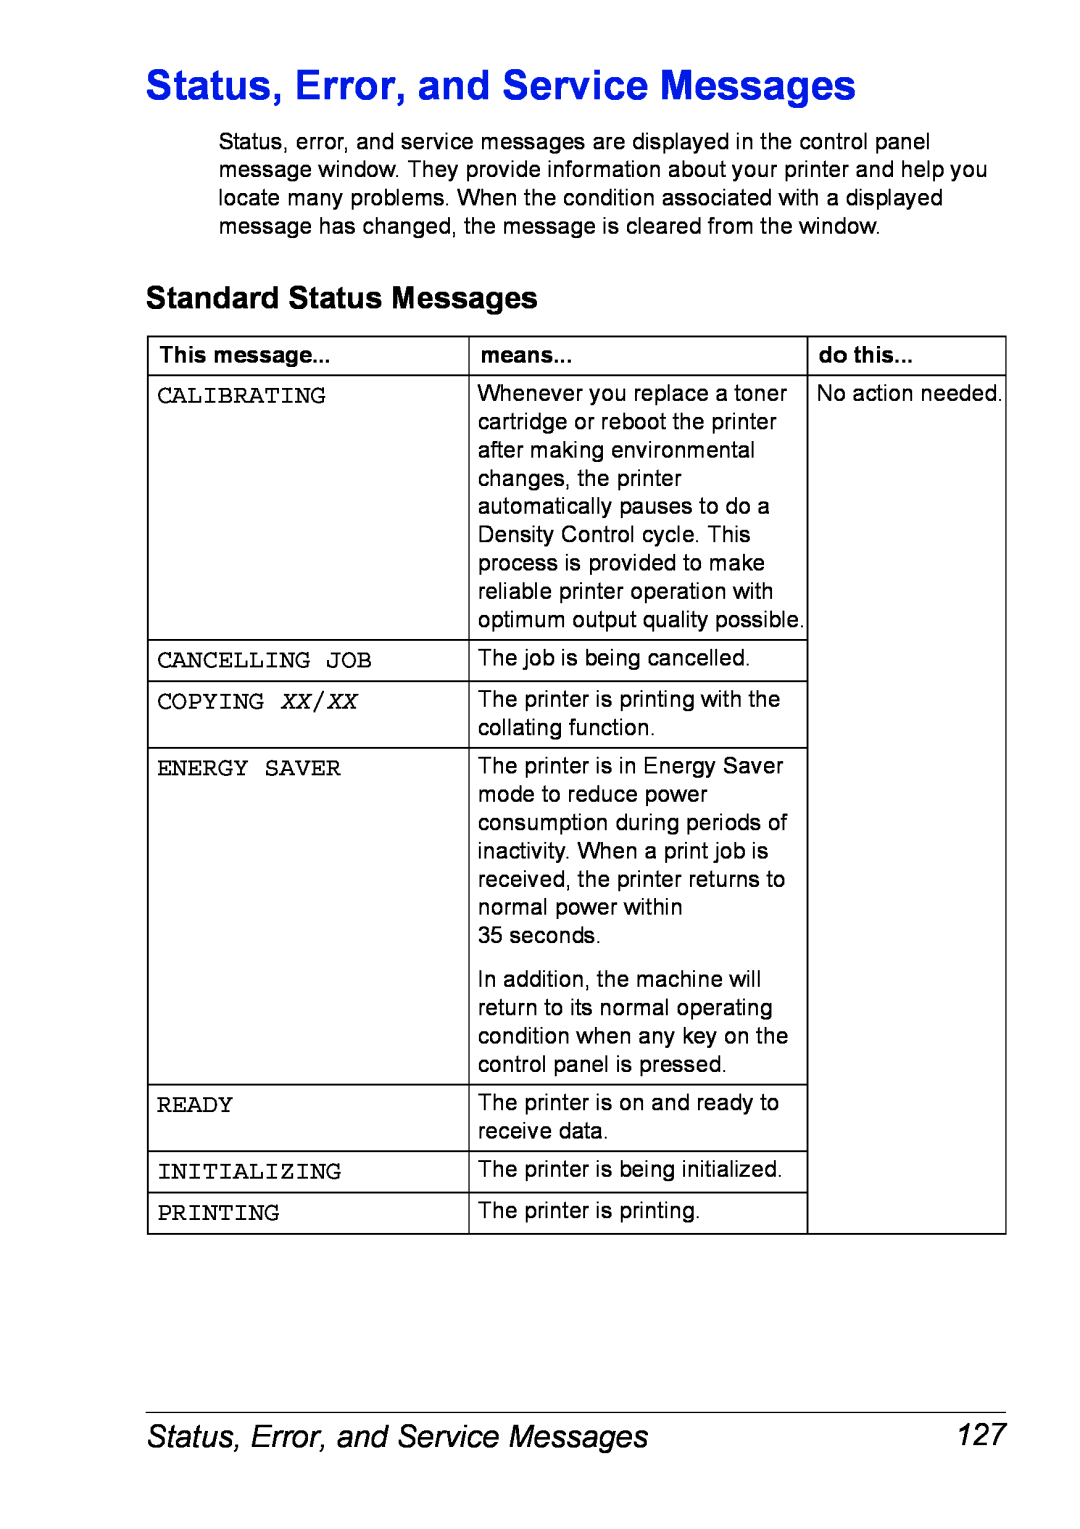 Xerox 6120 manual Status, Error, and Service Messages, Standard Status Messages 